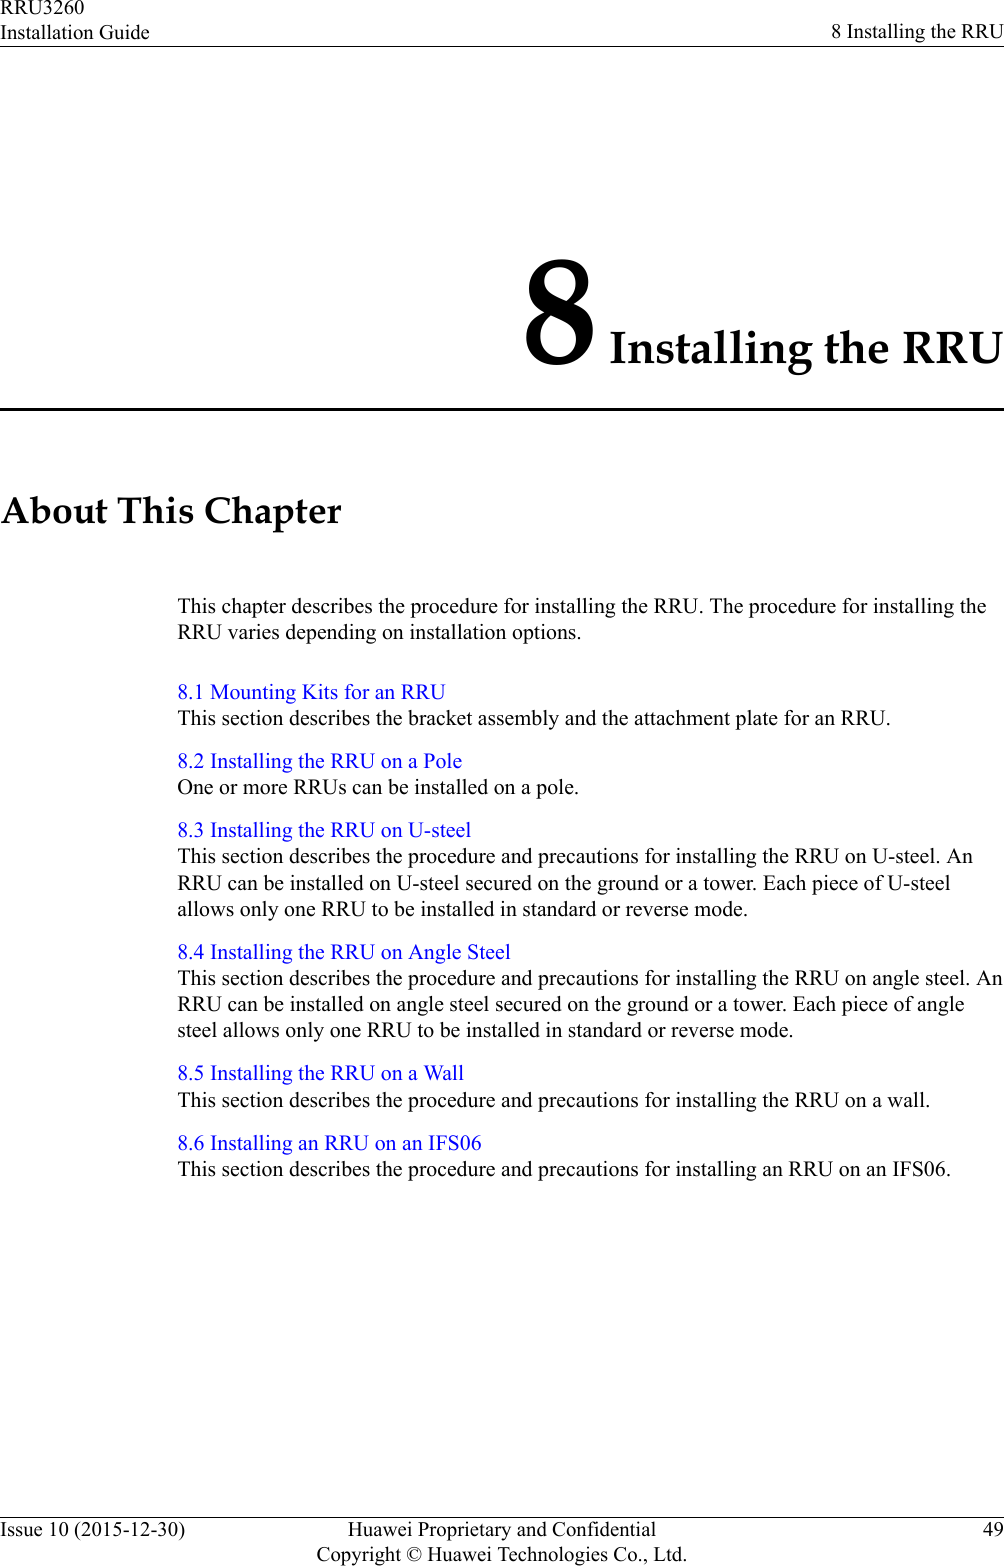 8 Installing the RRUAbout This ChapterThis chapter describes the procedure for installing the RRU. The procedure for installing theRRU varies depending on installation options.8.1 Mounting Kits for an RRUThis section describes the bracket assembly and the attachment plate for an RRU.8.2 Installing the RRU on a PoleOne or more RRUs can be installed on a pole.8.3 Installing the RRU on U-steelThis section describes the procedure and precautions for installing the RRU on U-steel. AnRRU can be installed on U-steel secured on the ground or a tower. Each piece of U-steelallows only one RRU to be installed in standard or reverse mode.8.4 Installing the RRU on Angle SteelThis section describes the procedure and precautions for installing the RRU on angle steel. AnRRU can be installed on angle steel secured on the ground or a tower. Each piece of anglesteel allows only one RRU to be installed in standard or reverse mode.8.5 Installing the RRU on a WallThis section describes the procedure and precautions for installing the RRU on a wall.8.6 Installing an RRU on an IFS06This section describes the procedure and precautions for installing an RRU on an IFS06.RRU3260Installation Guide 8 Installing the RRUIssue 10 (2015-12-30) Huawei Proprietary and ConfidentialCopyright © Huawei Technologies Co., Ltd.49